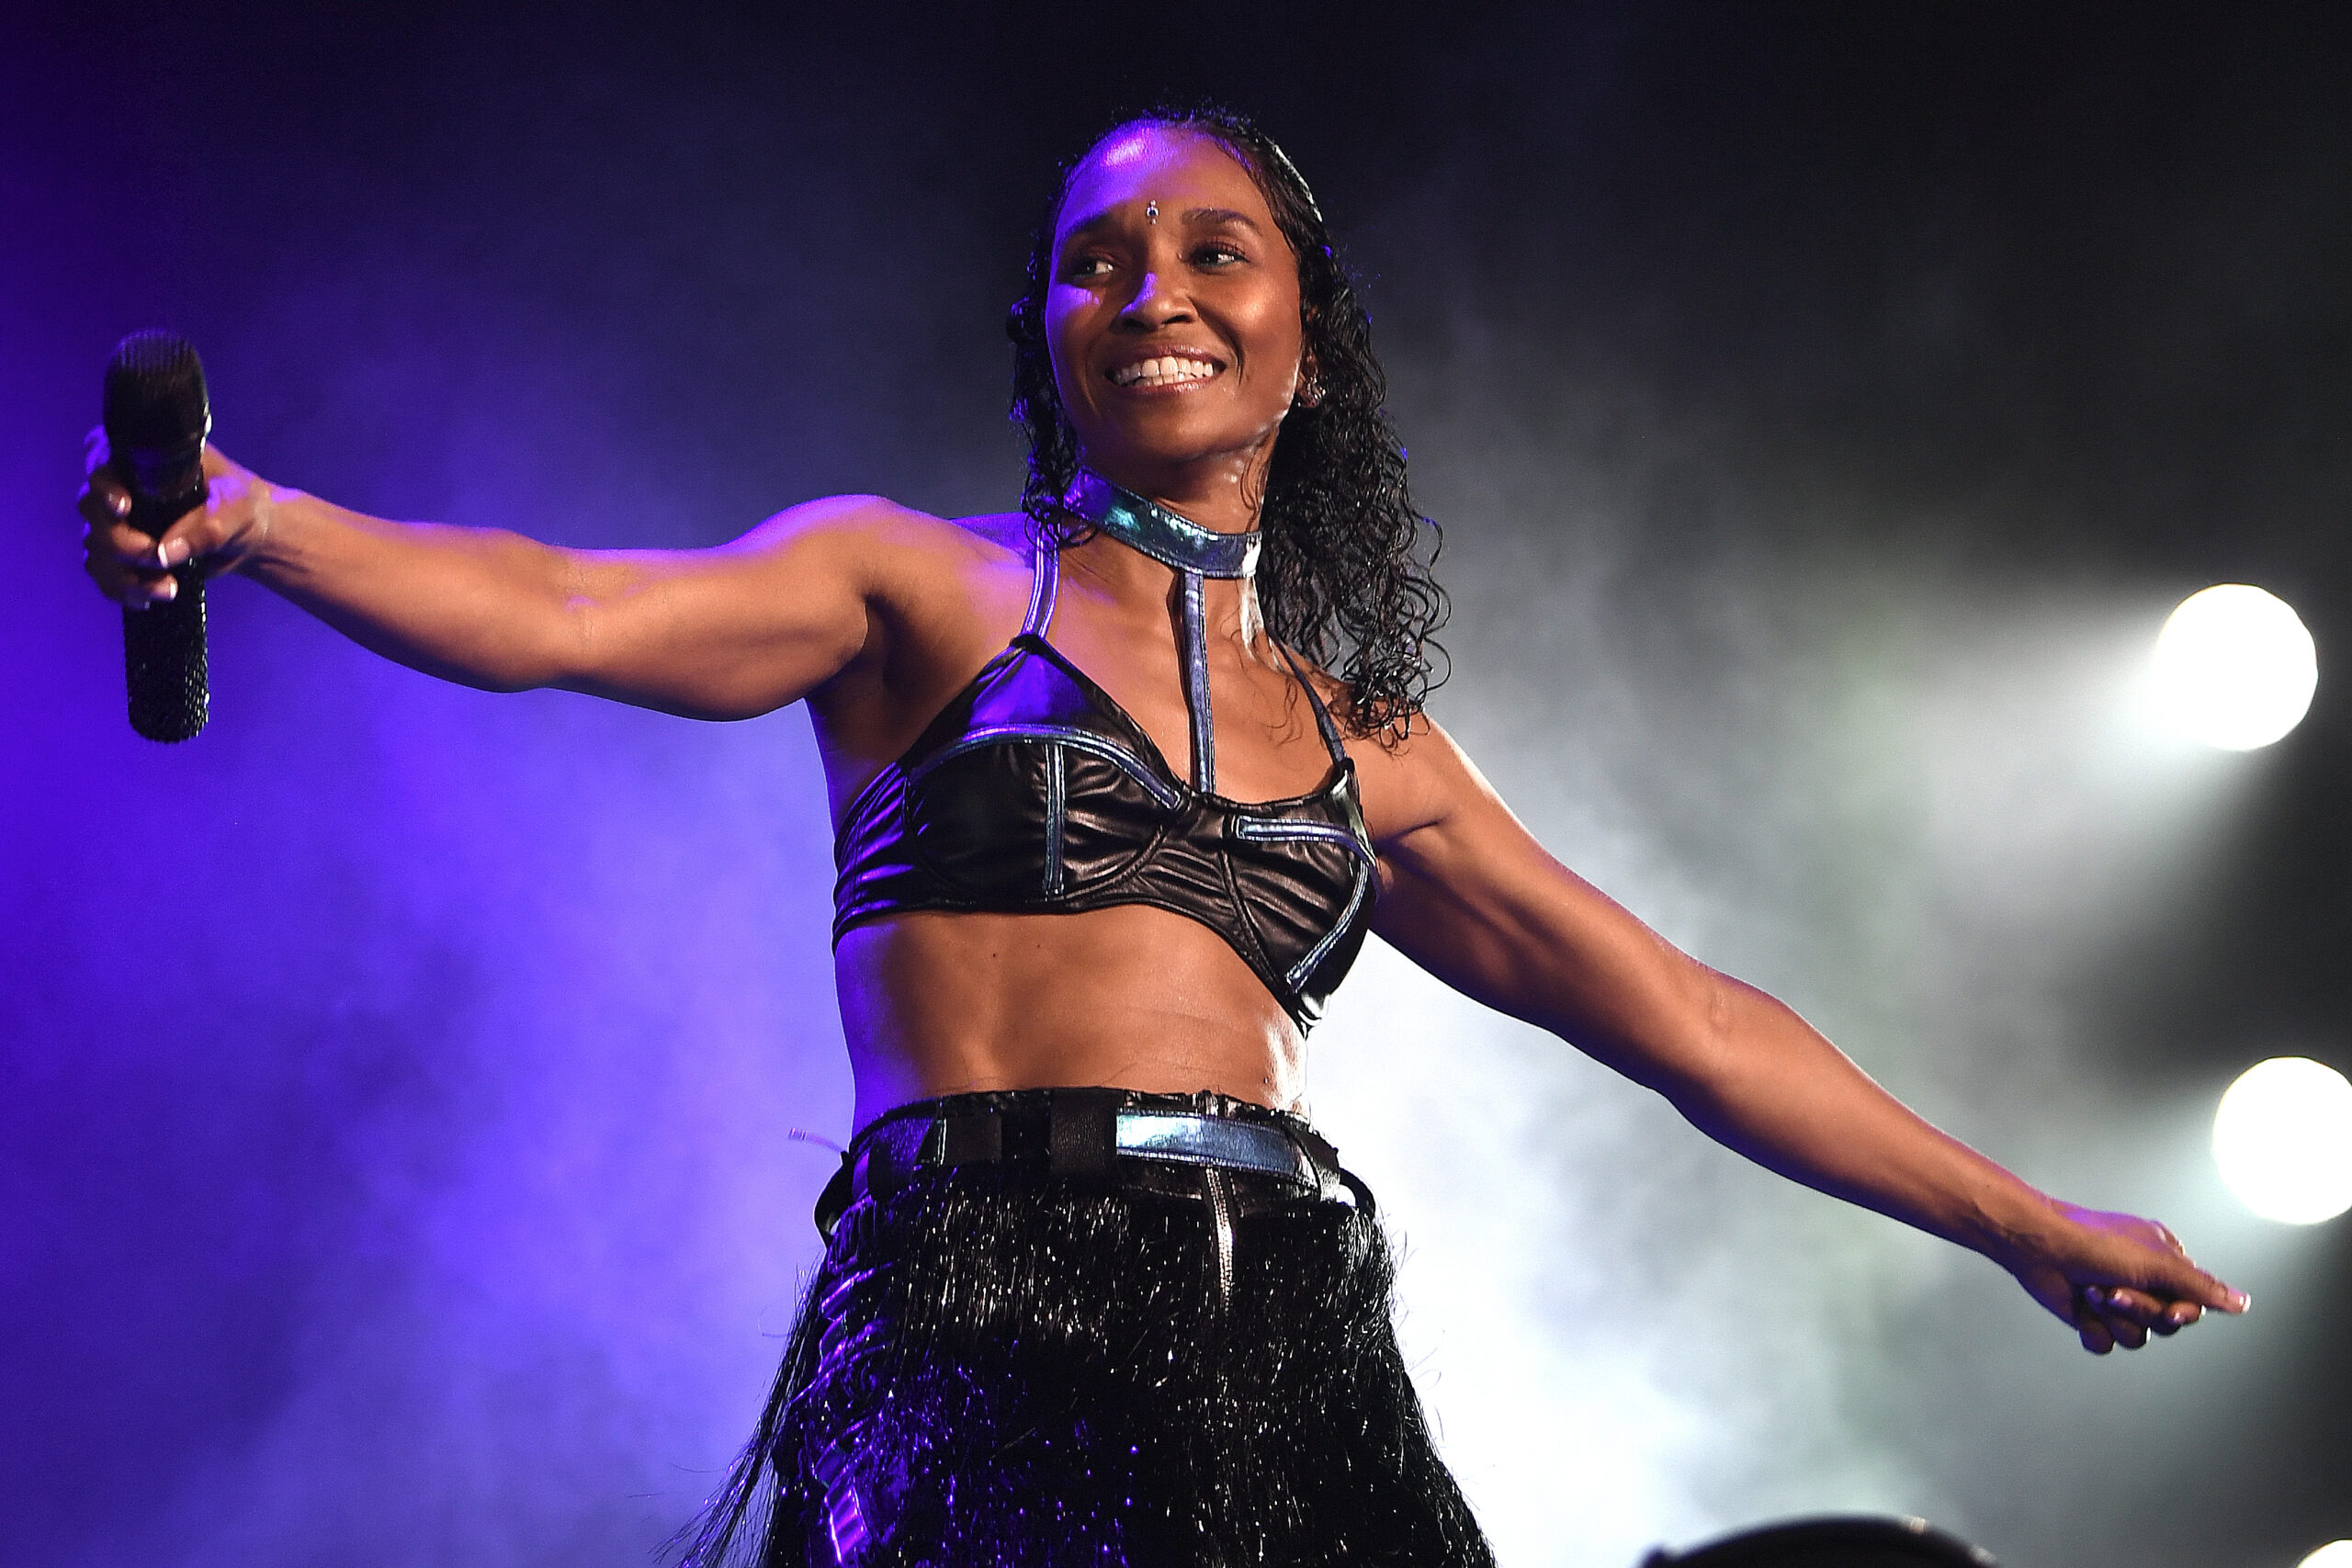 TLC's Chilli opens up about fame and challenges in a new Lifetime documentary